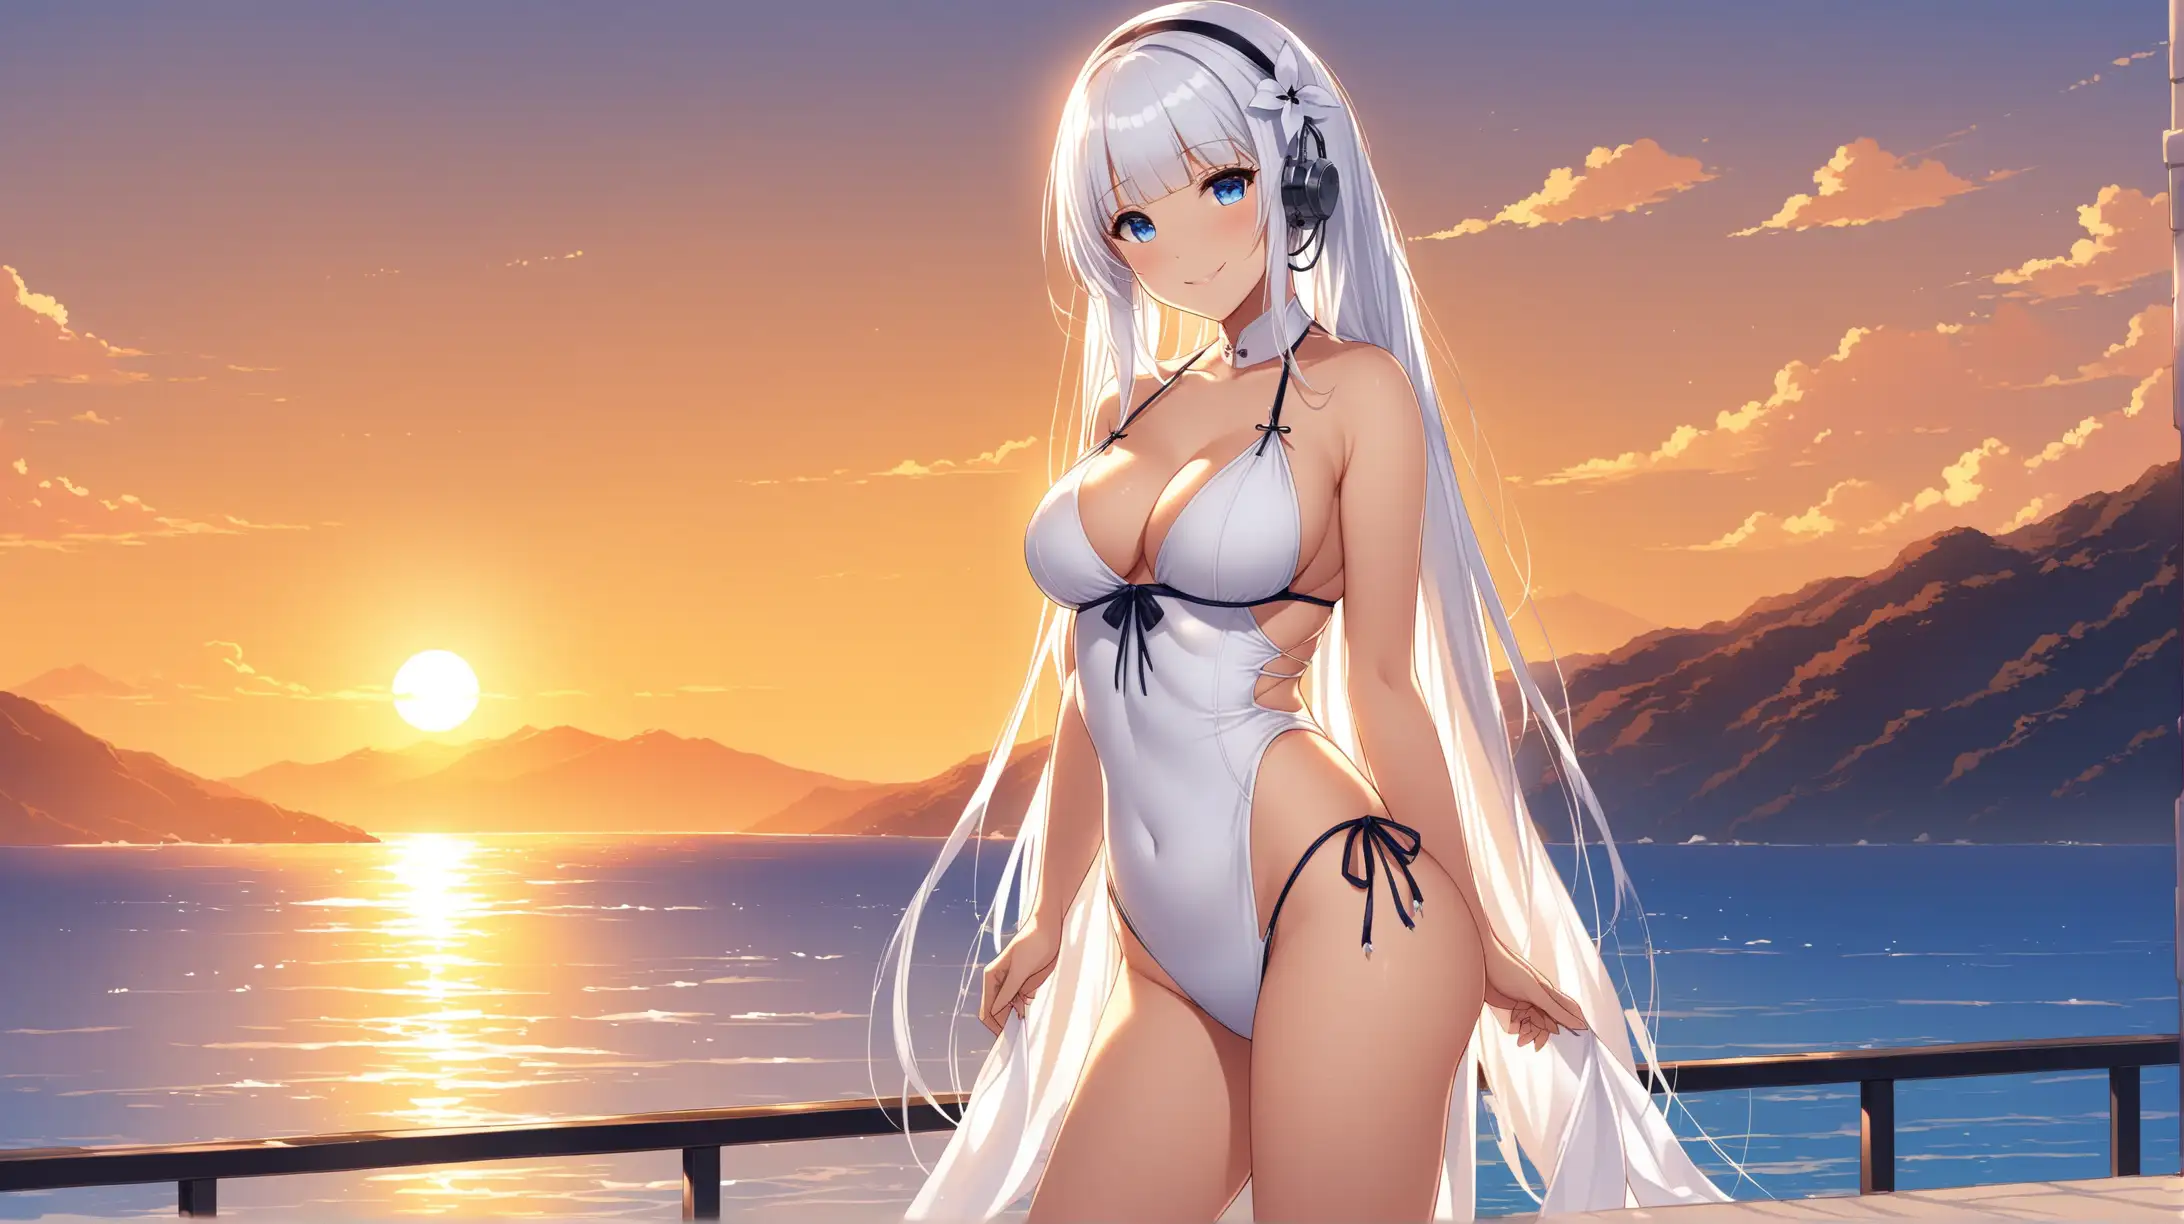 Draw the character Illustrious from Azur Lane, blue eyes, high quality, ambient lighting, long shot, outdoors, seductive pose, swimsuit, smiling at the viewer